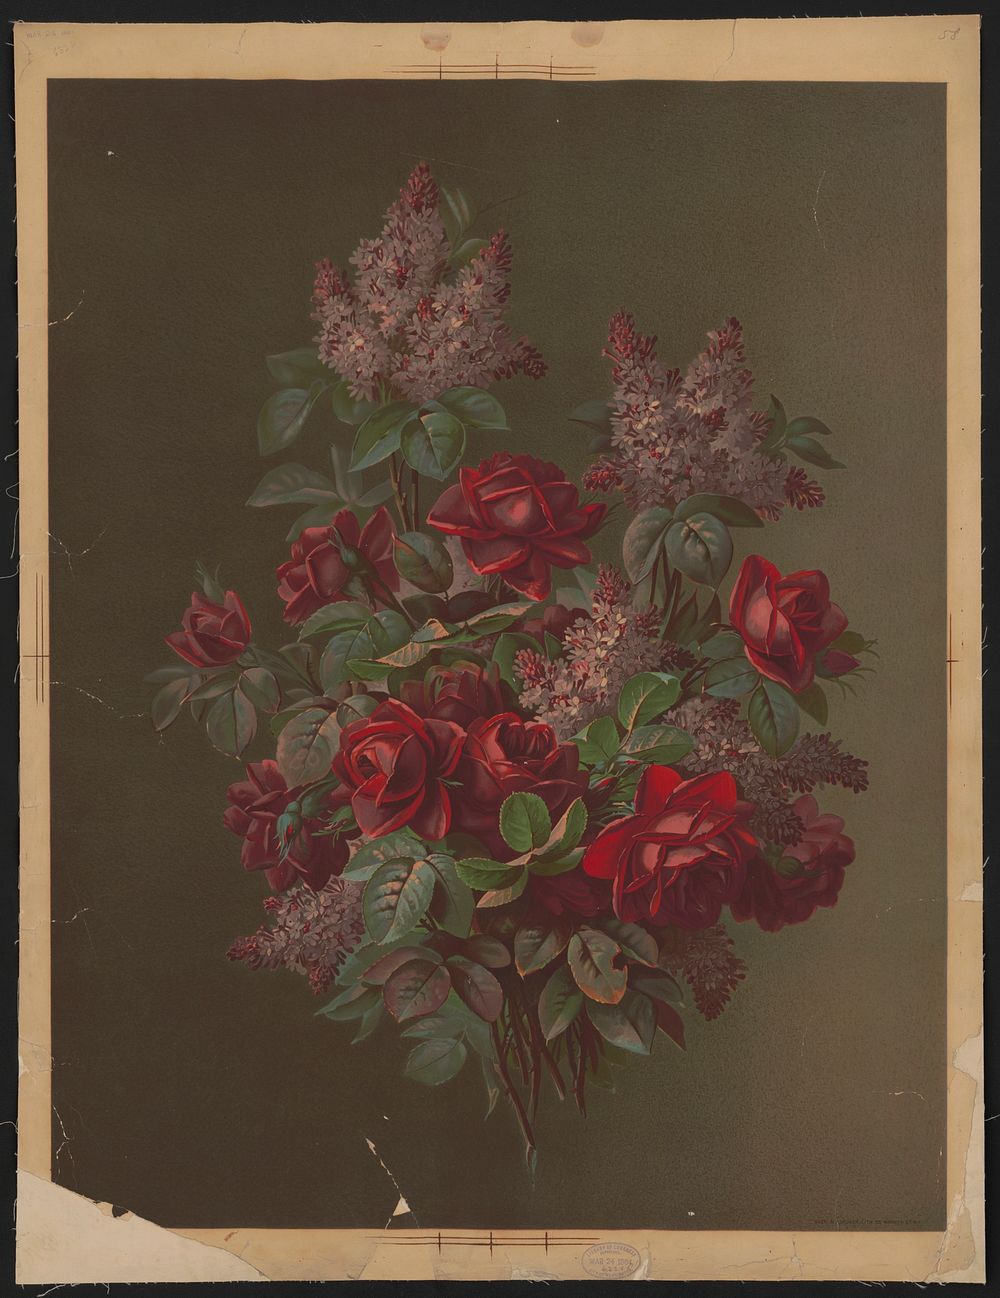 Bouquet of red roses and other flowers (1884). Original from the Library of Congress.